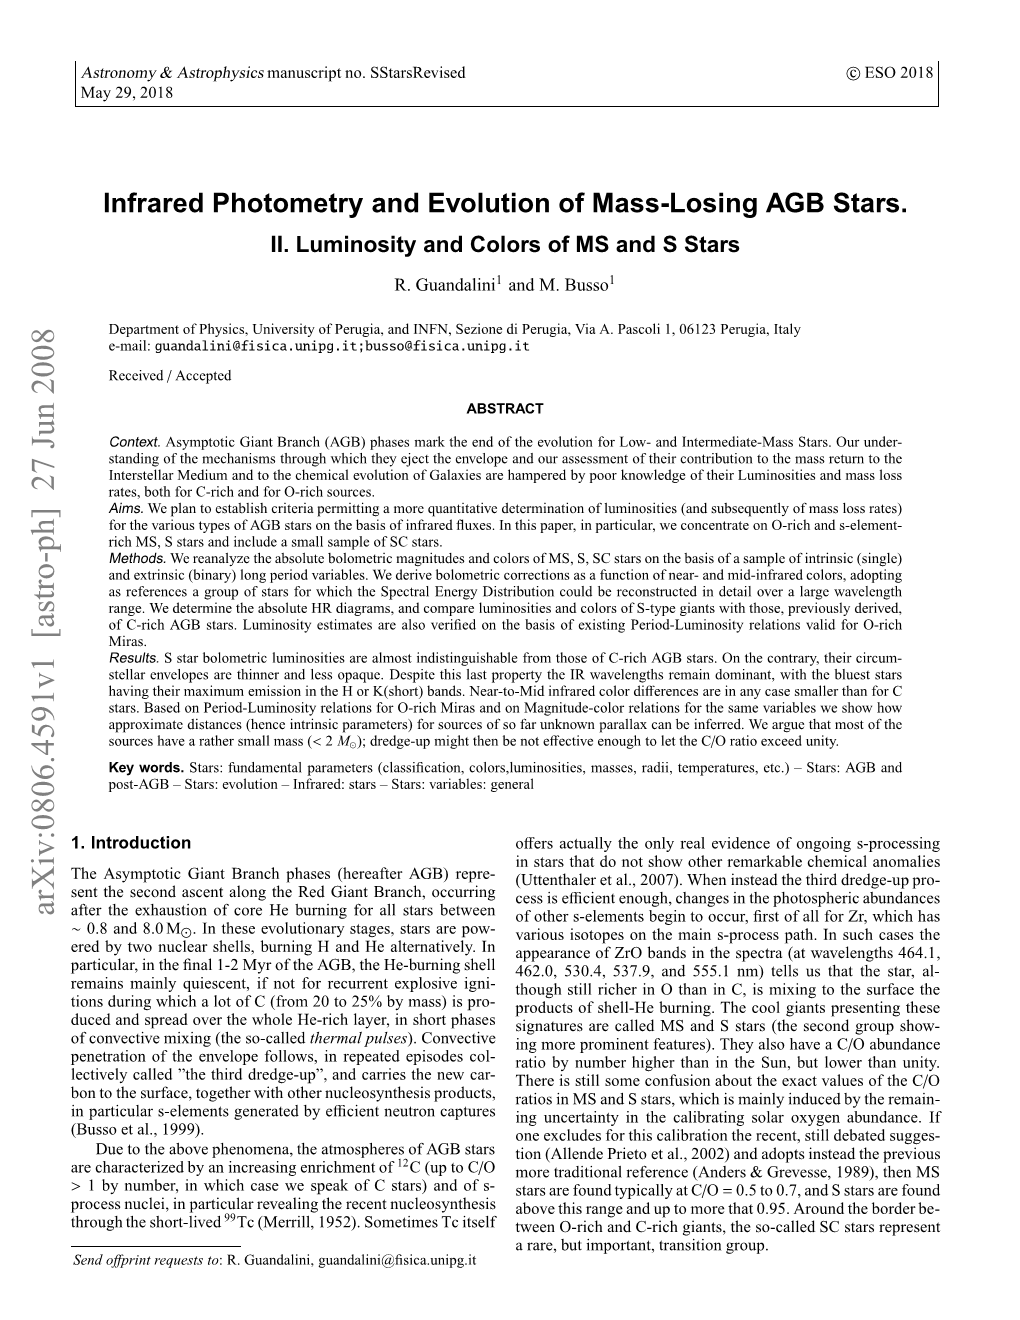 Infrared Photometry and Evolution of Mass-Losing AGB Stars